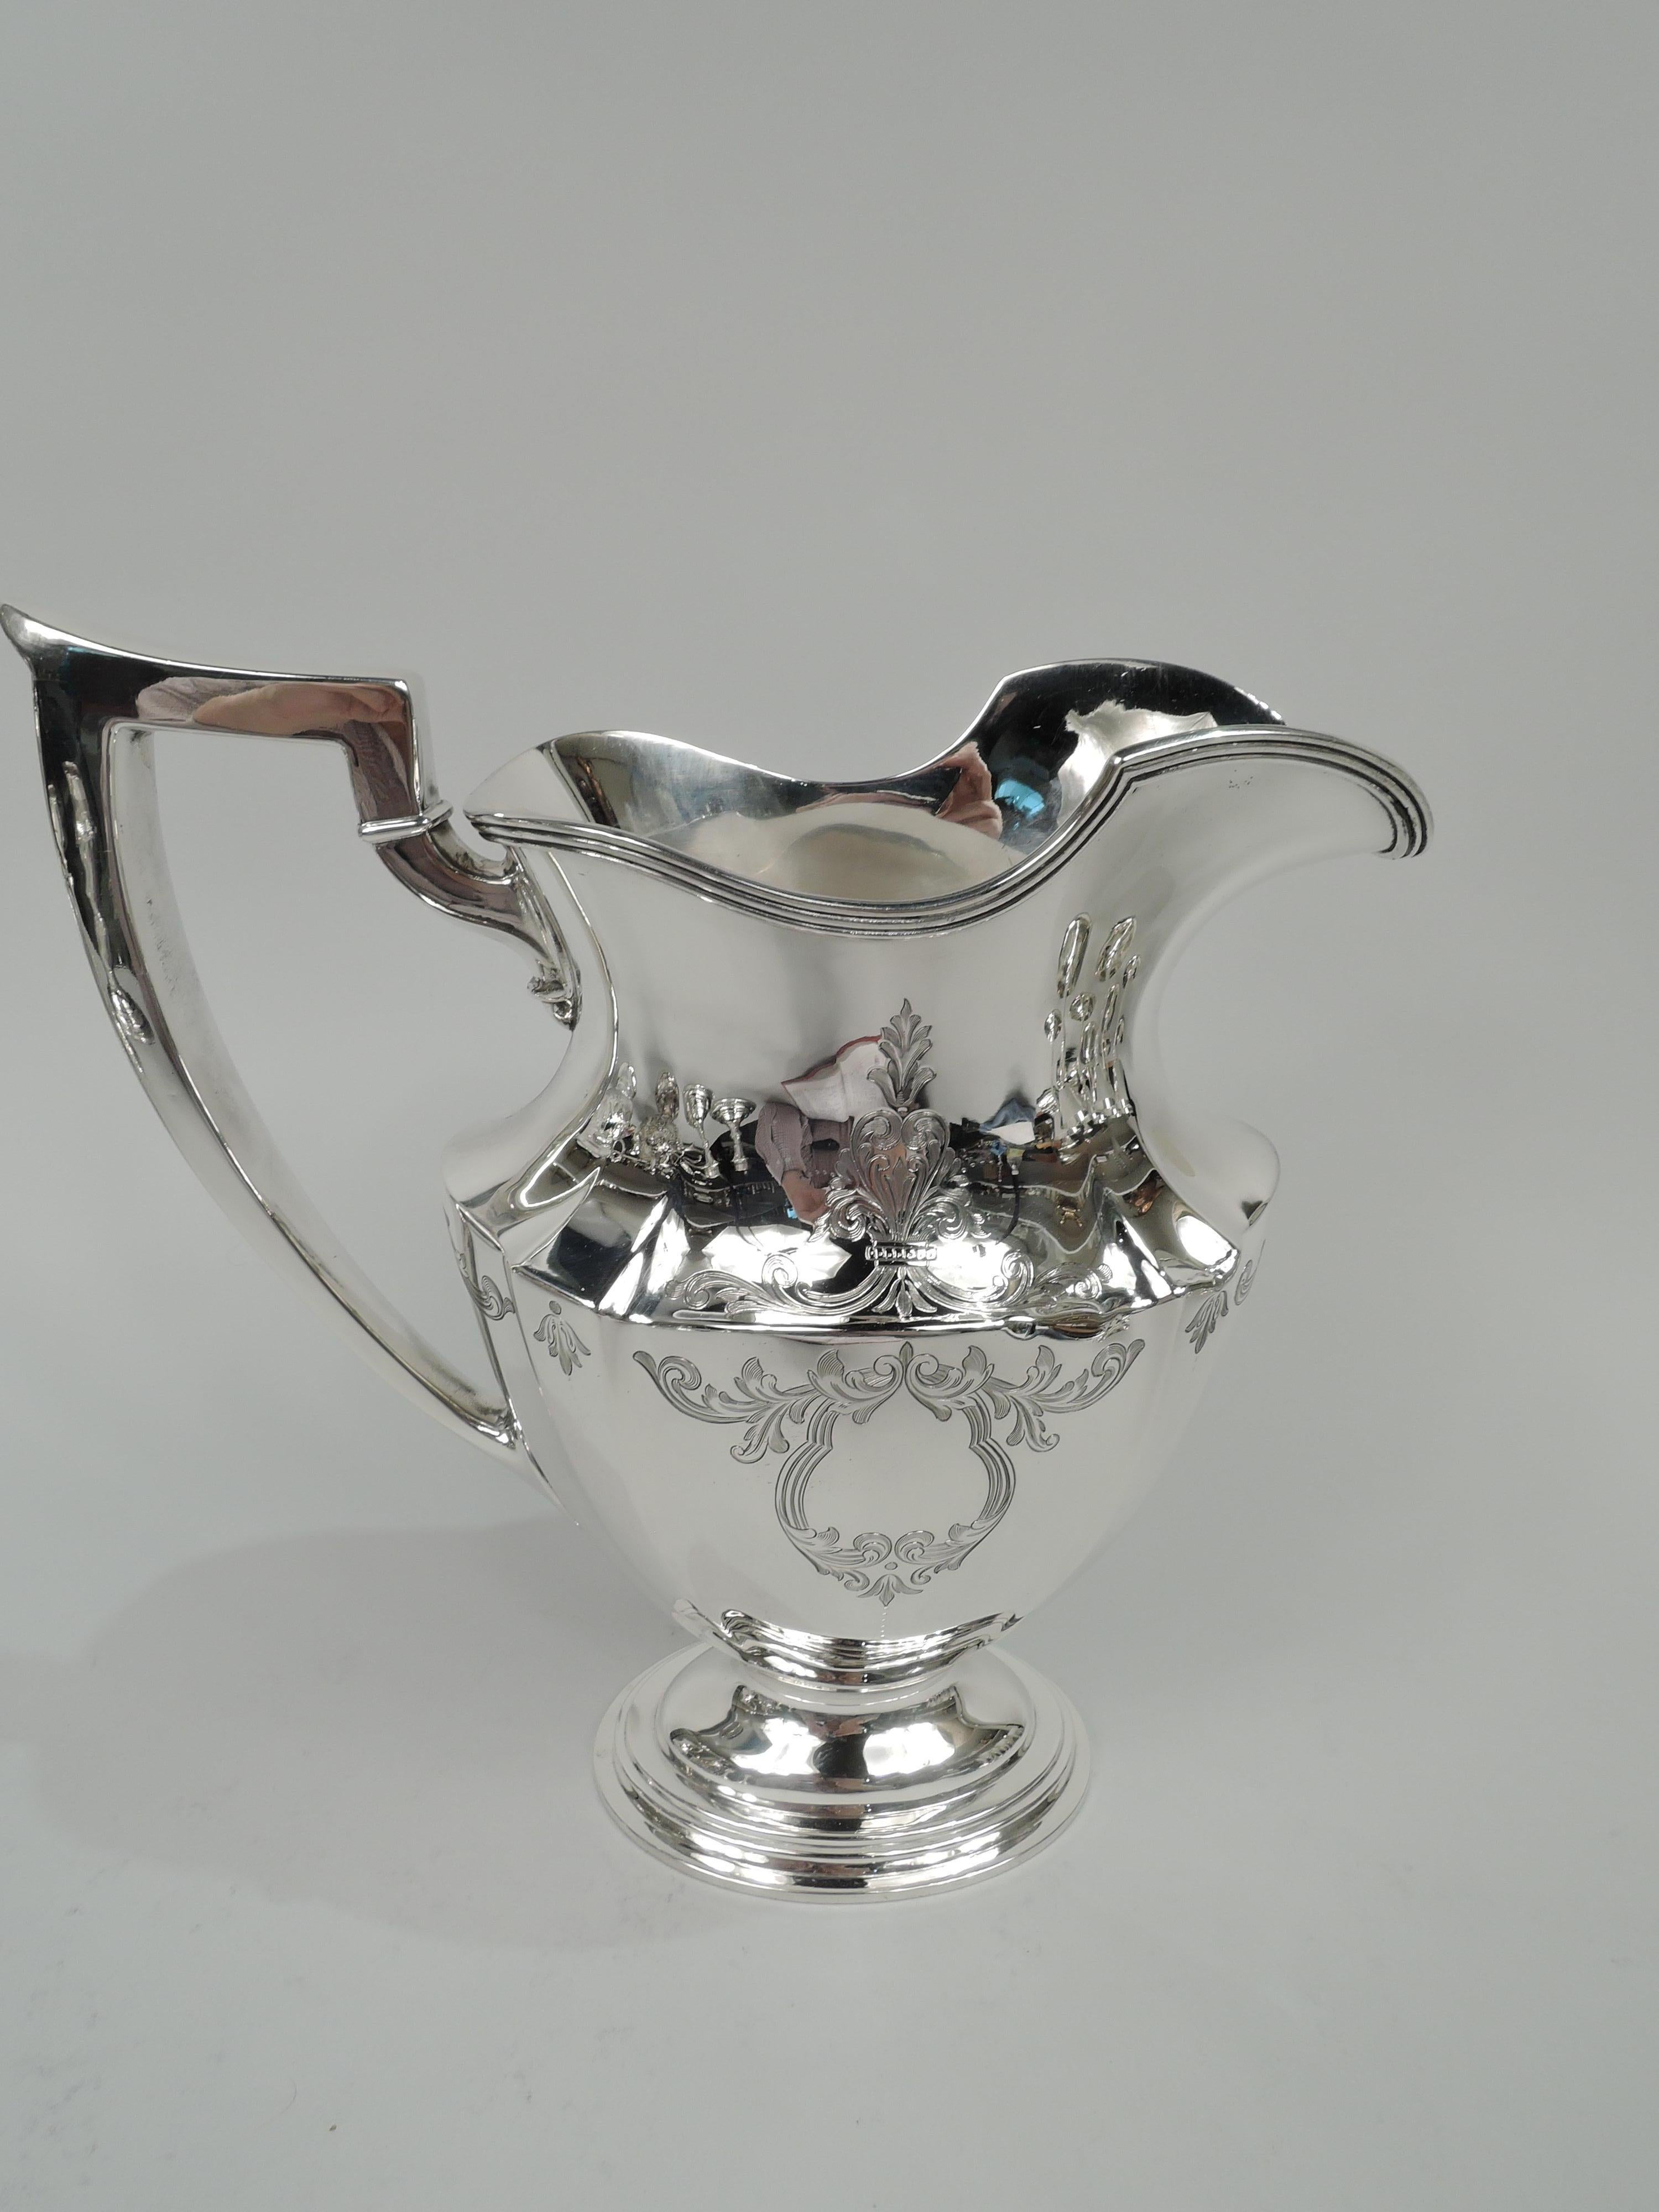 Regency Revival Gorham Engraved Plymouth Sterling Silver Water Pitcher